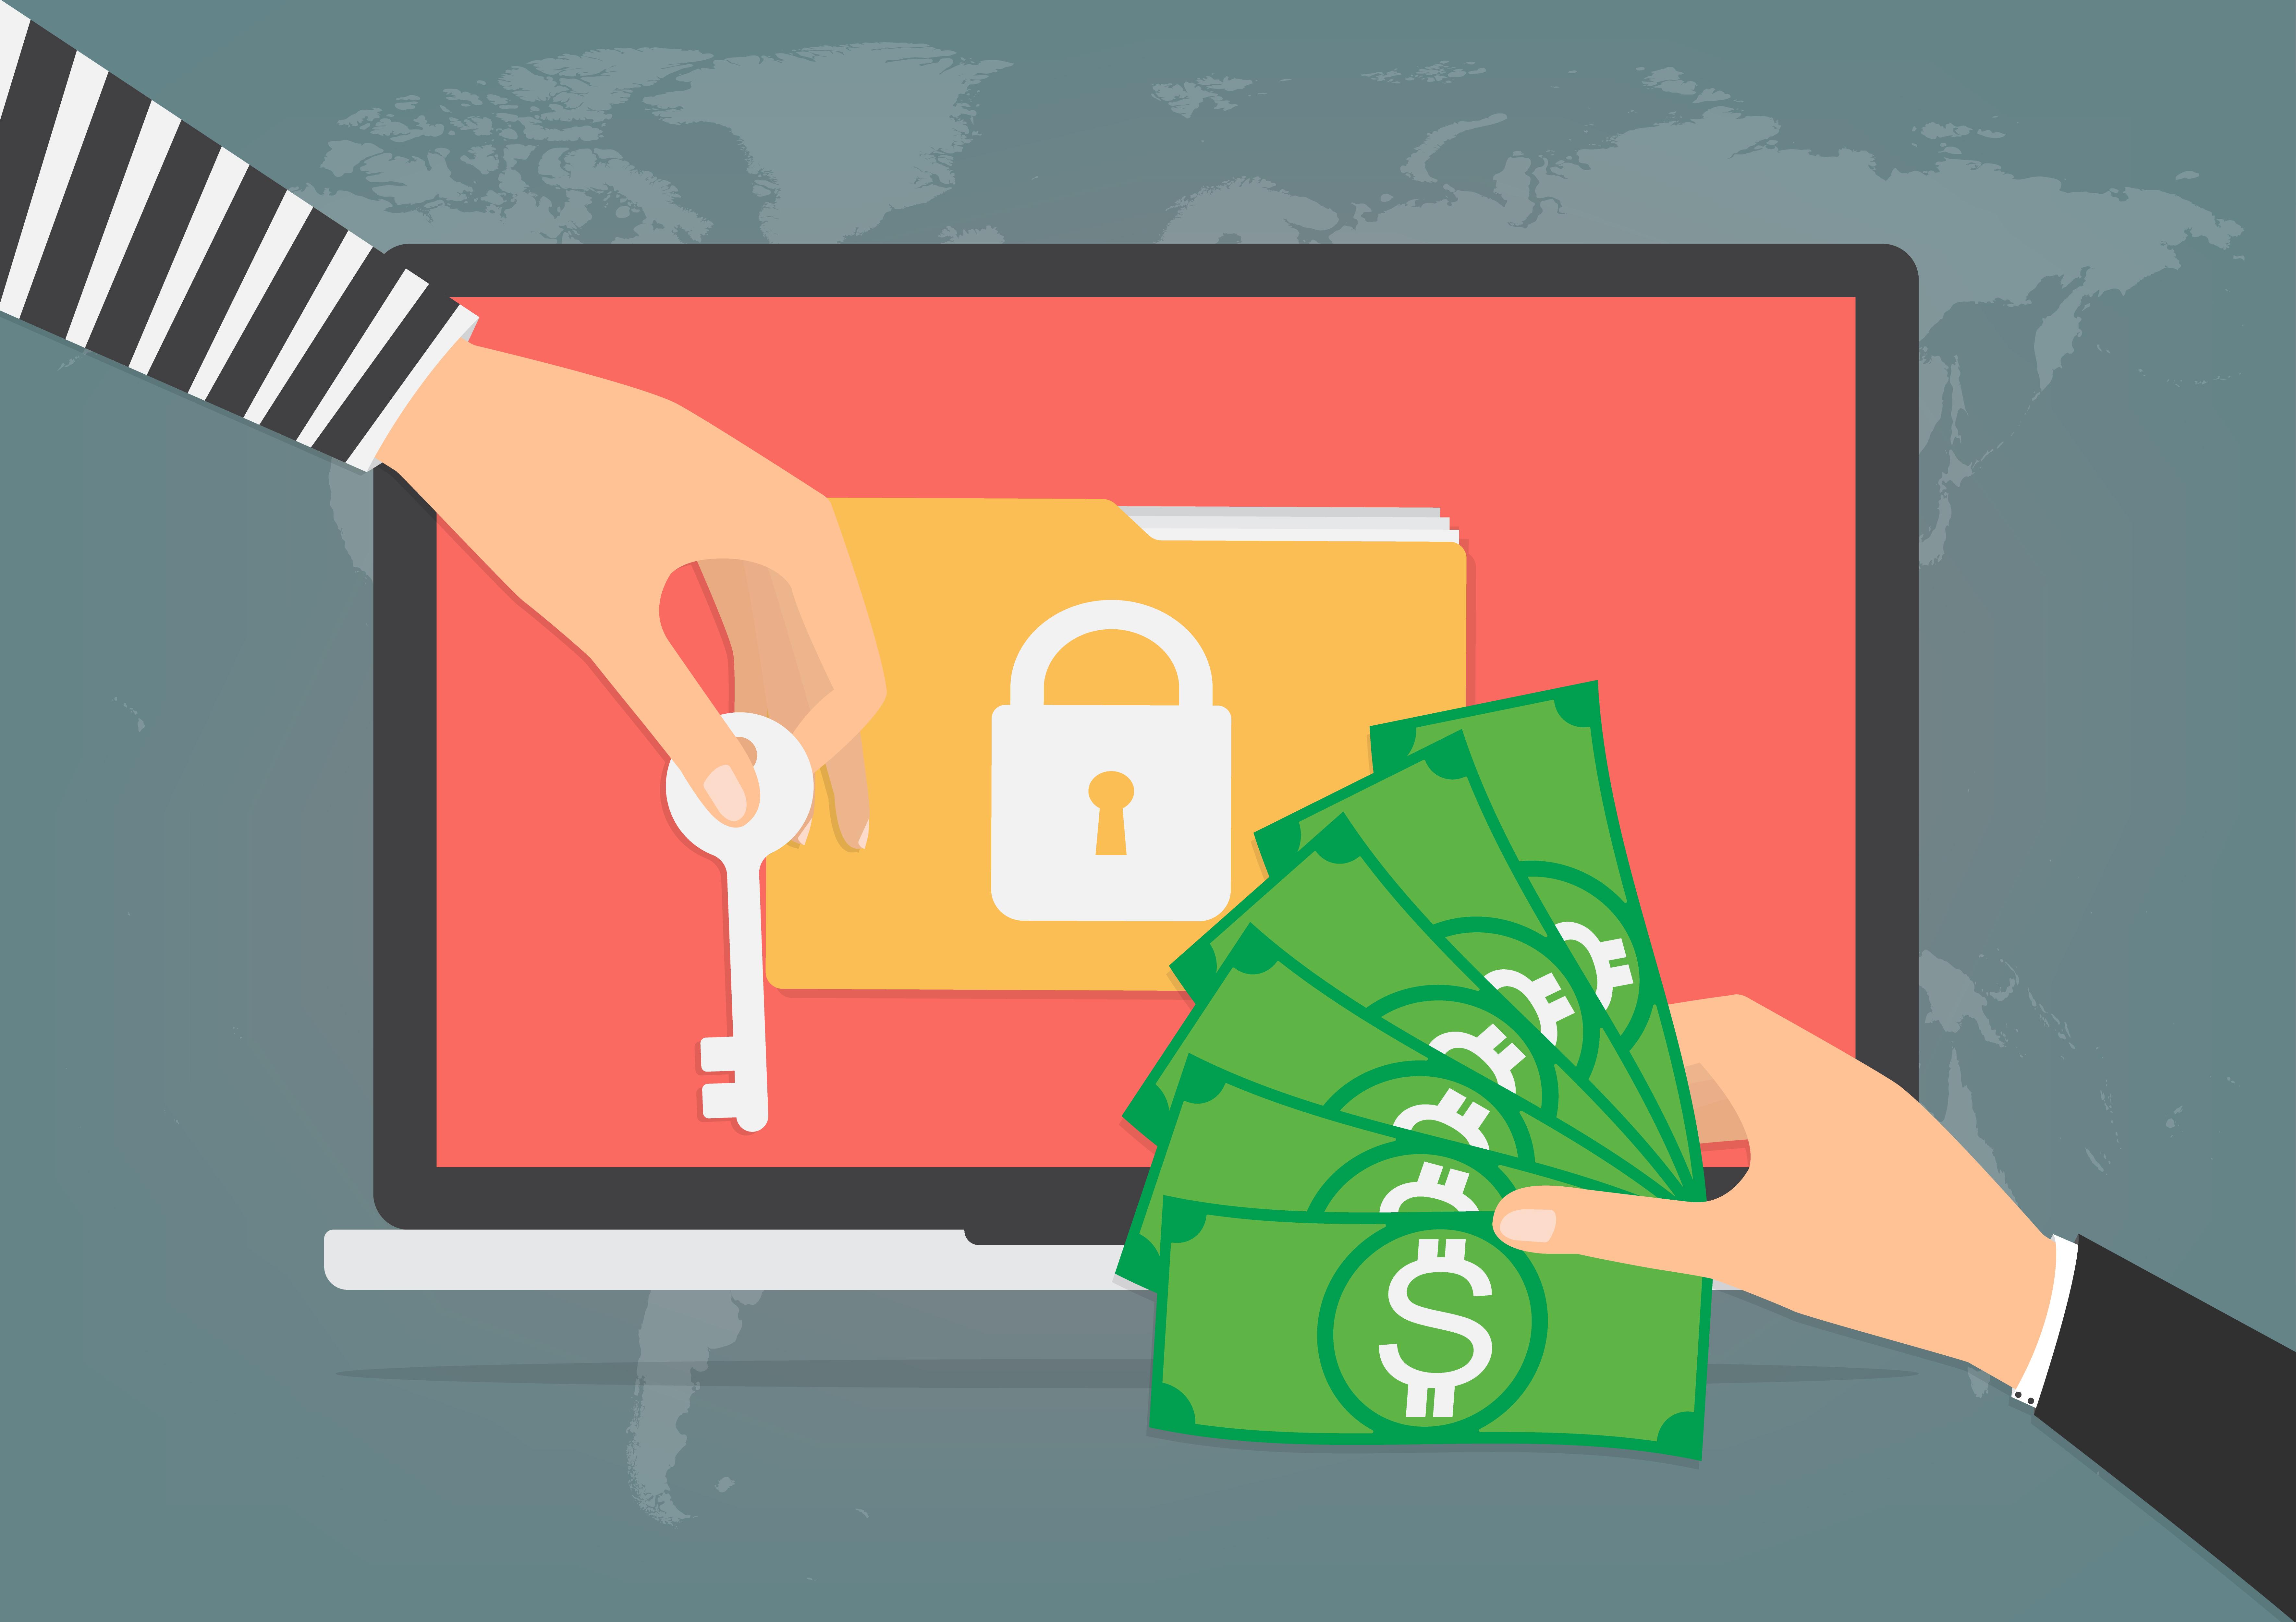 Cybersecurity: Ransomware - How to Protect Yourself